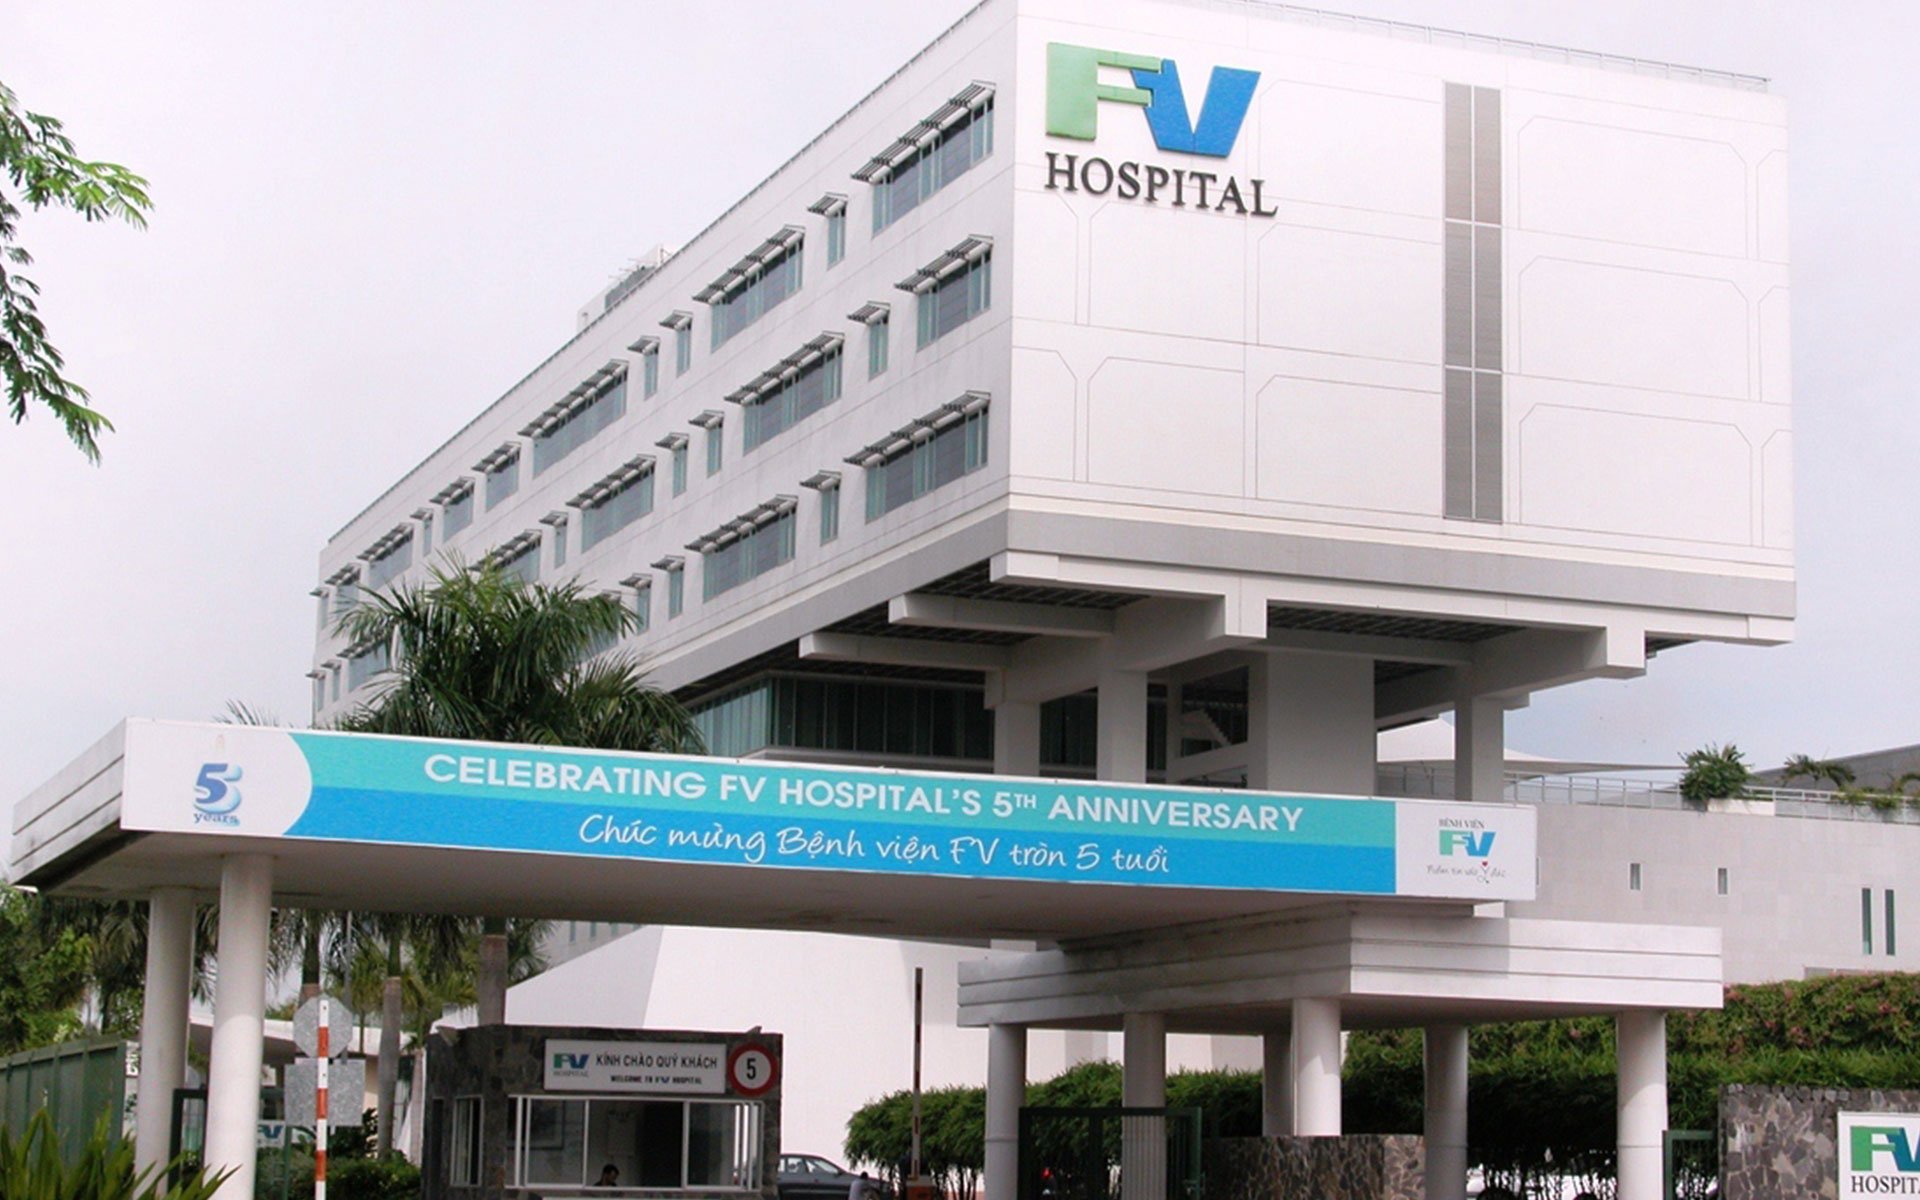 Best hospitals and medical centers in Vietnam